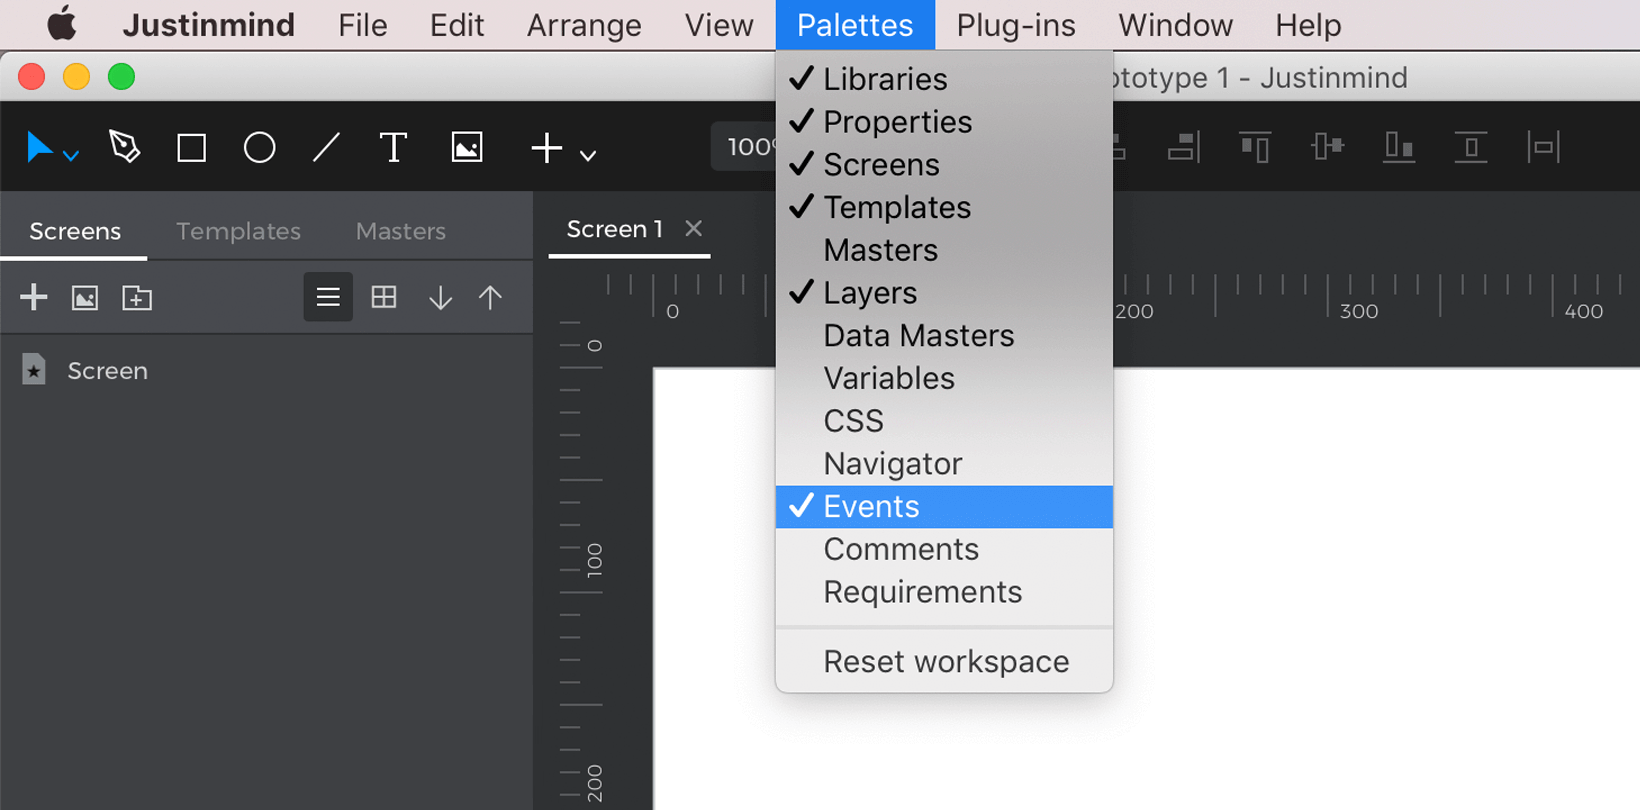 You can check the events palette to be shown in the Window menu